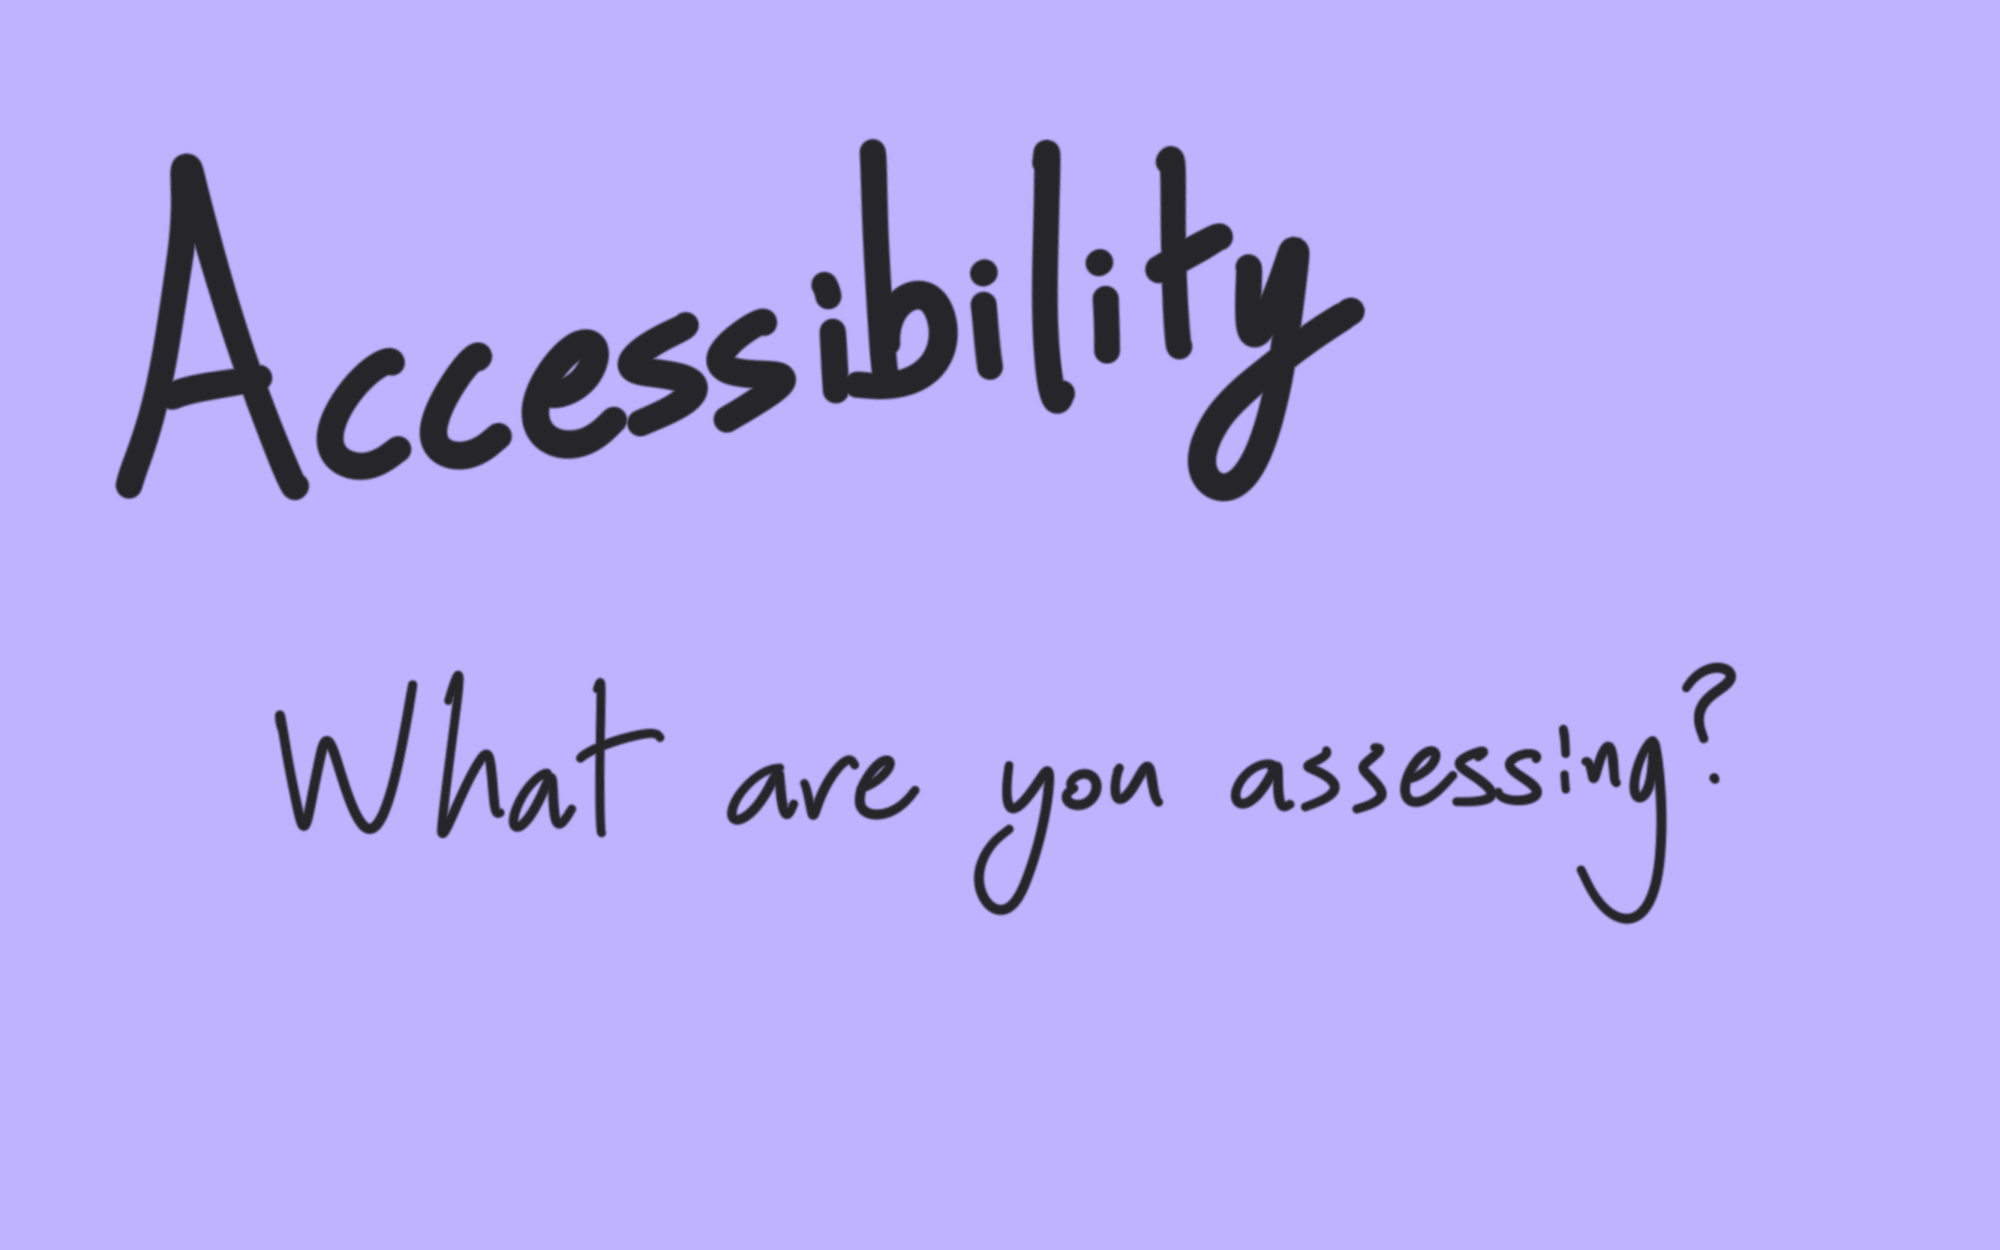 Accessibility - what are you assessing?